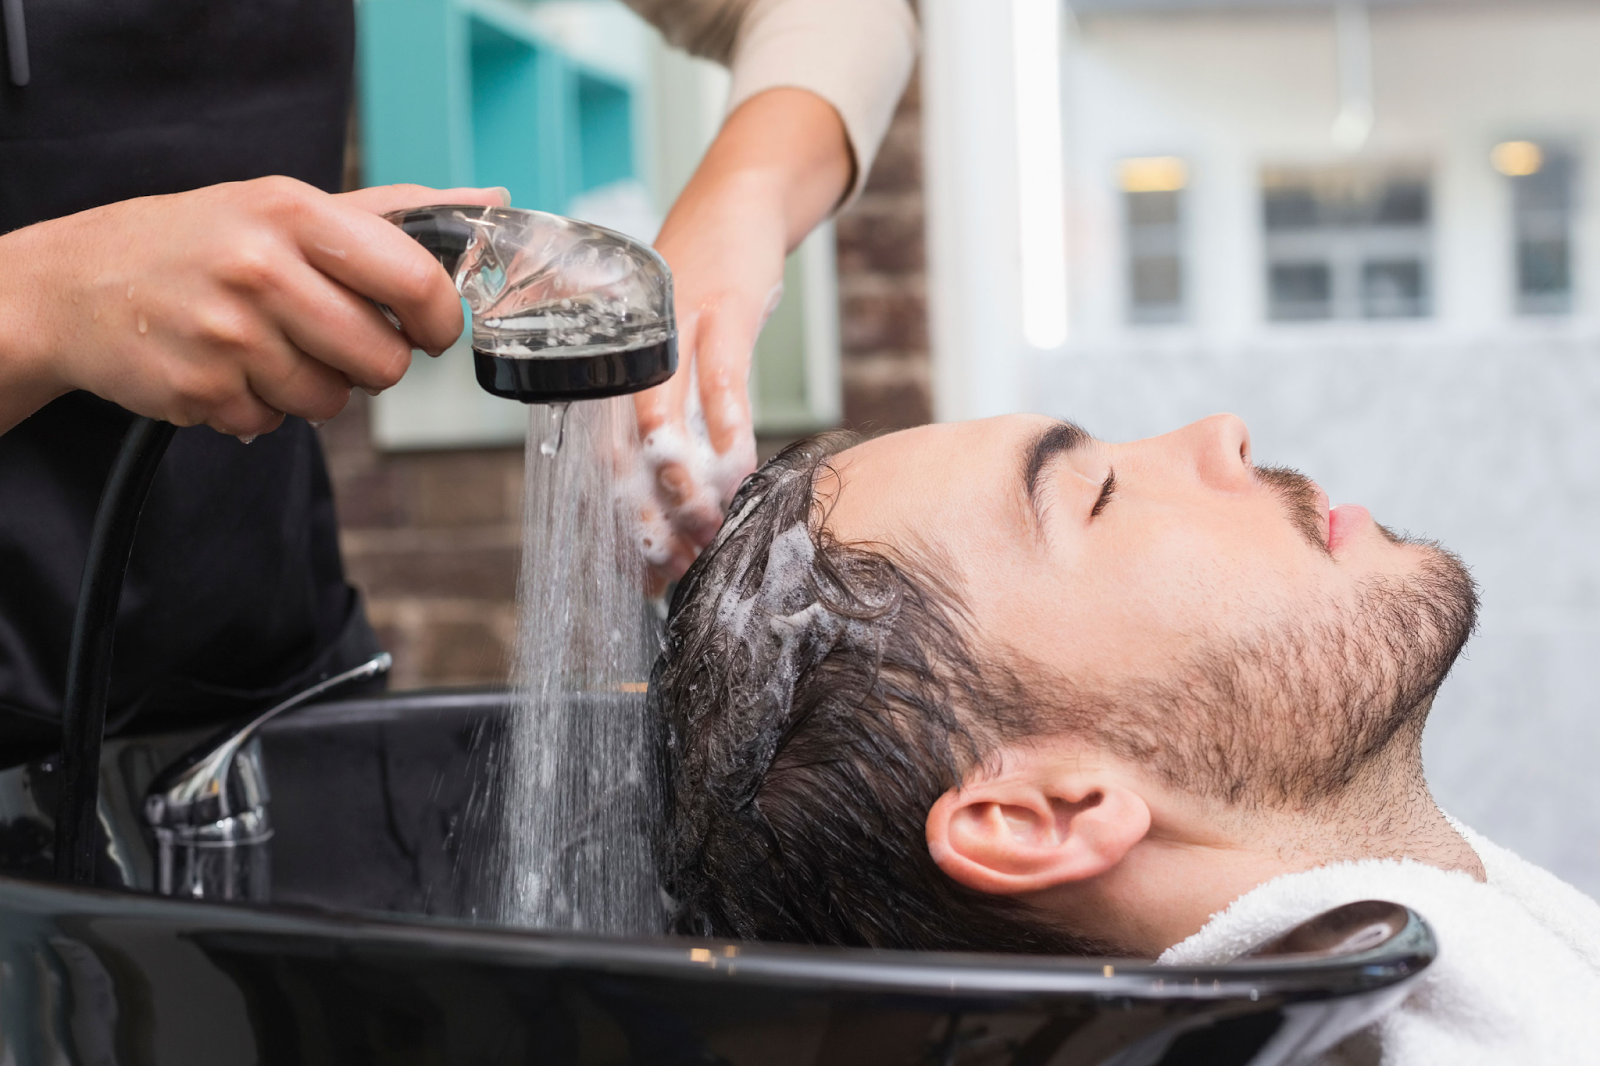 5 Things to look for in a good hair loss shampoo - Beauty Tips